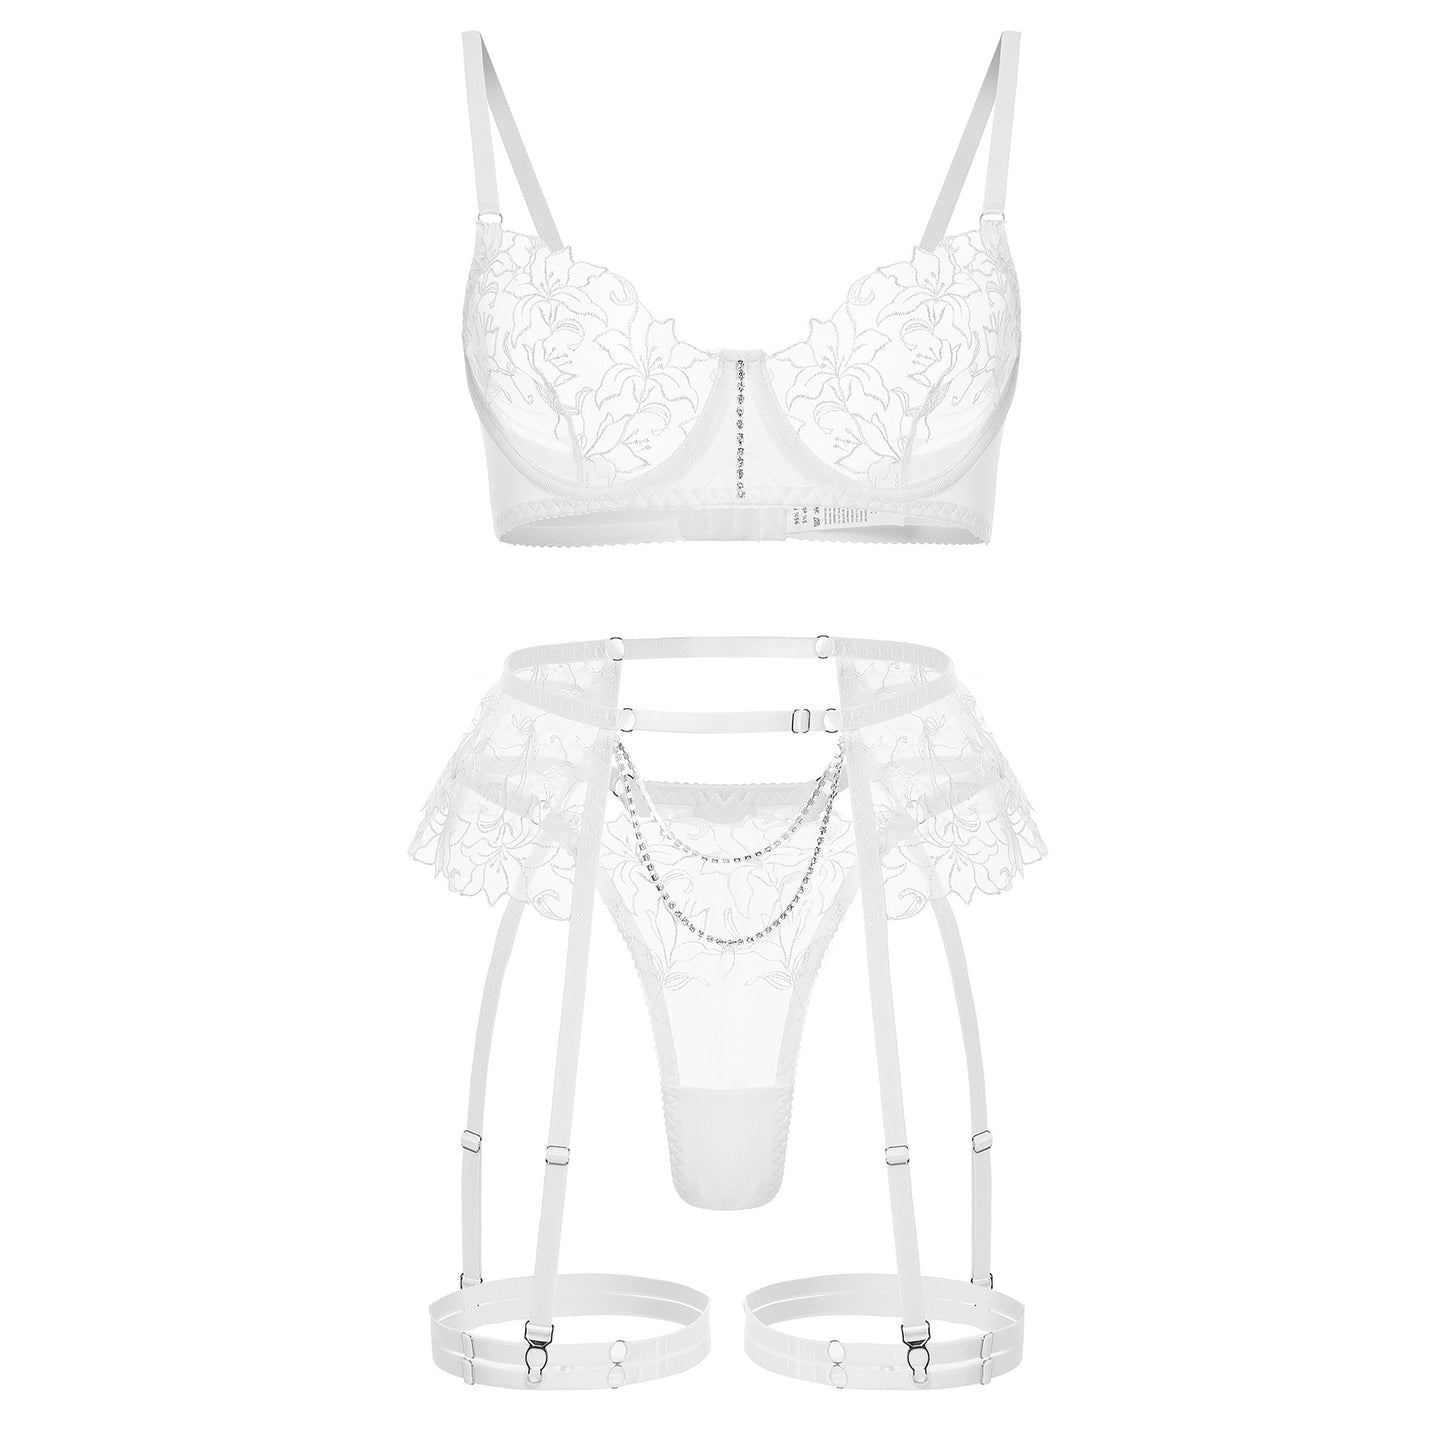 Bridal Lingerie Outfit | Wedding Night Rhinestone Chain Floral Lace Lingerie Outfit 5-piece Set